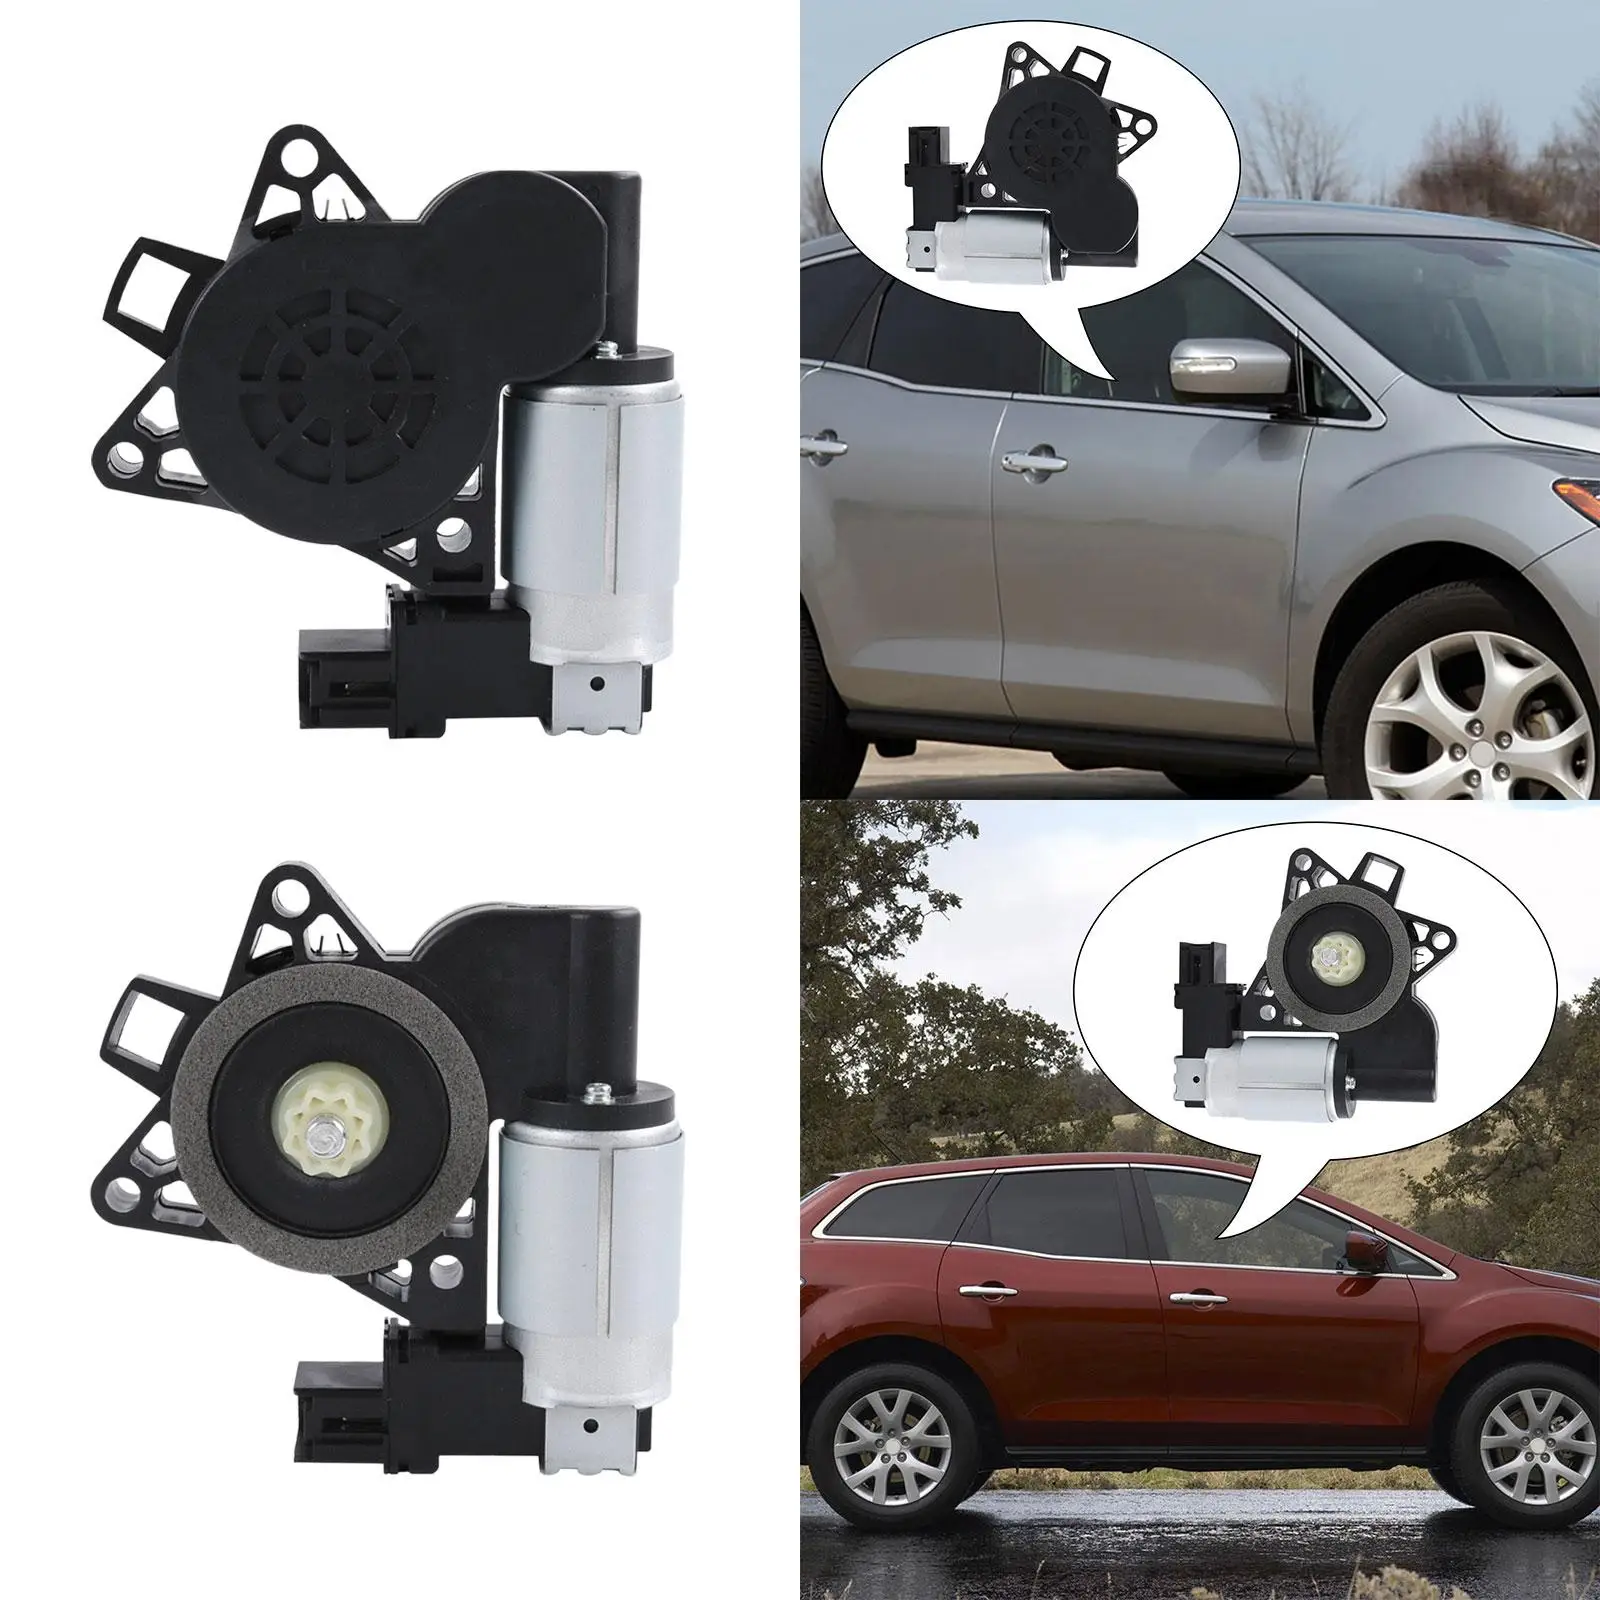 Power Window Lifter Motor Accessories Practical Durable Easy to Install Convenient Replace Parts Side Window Motor